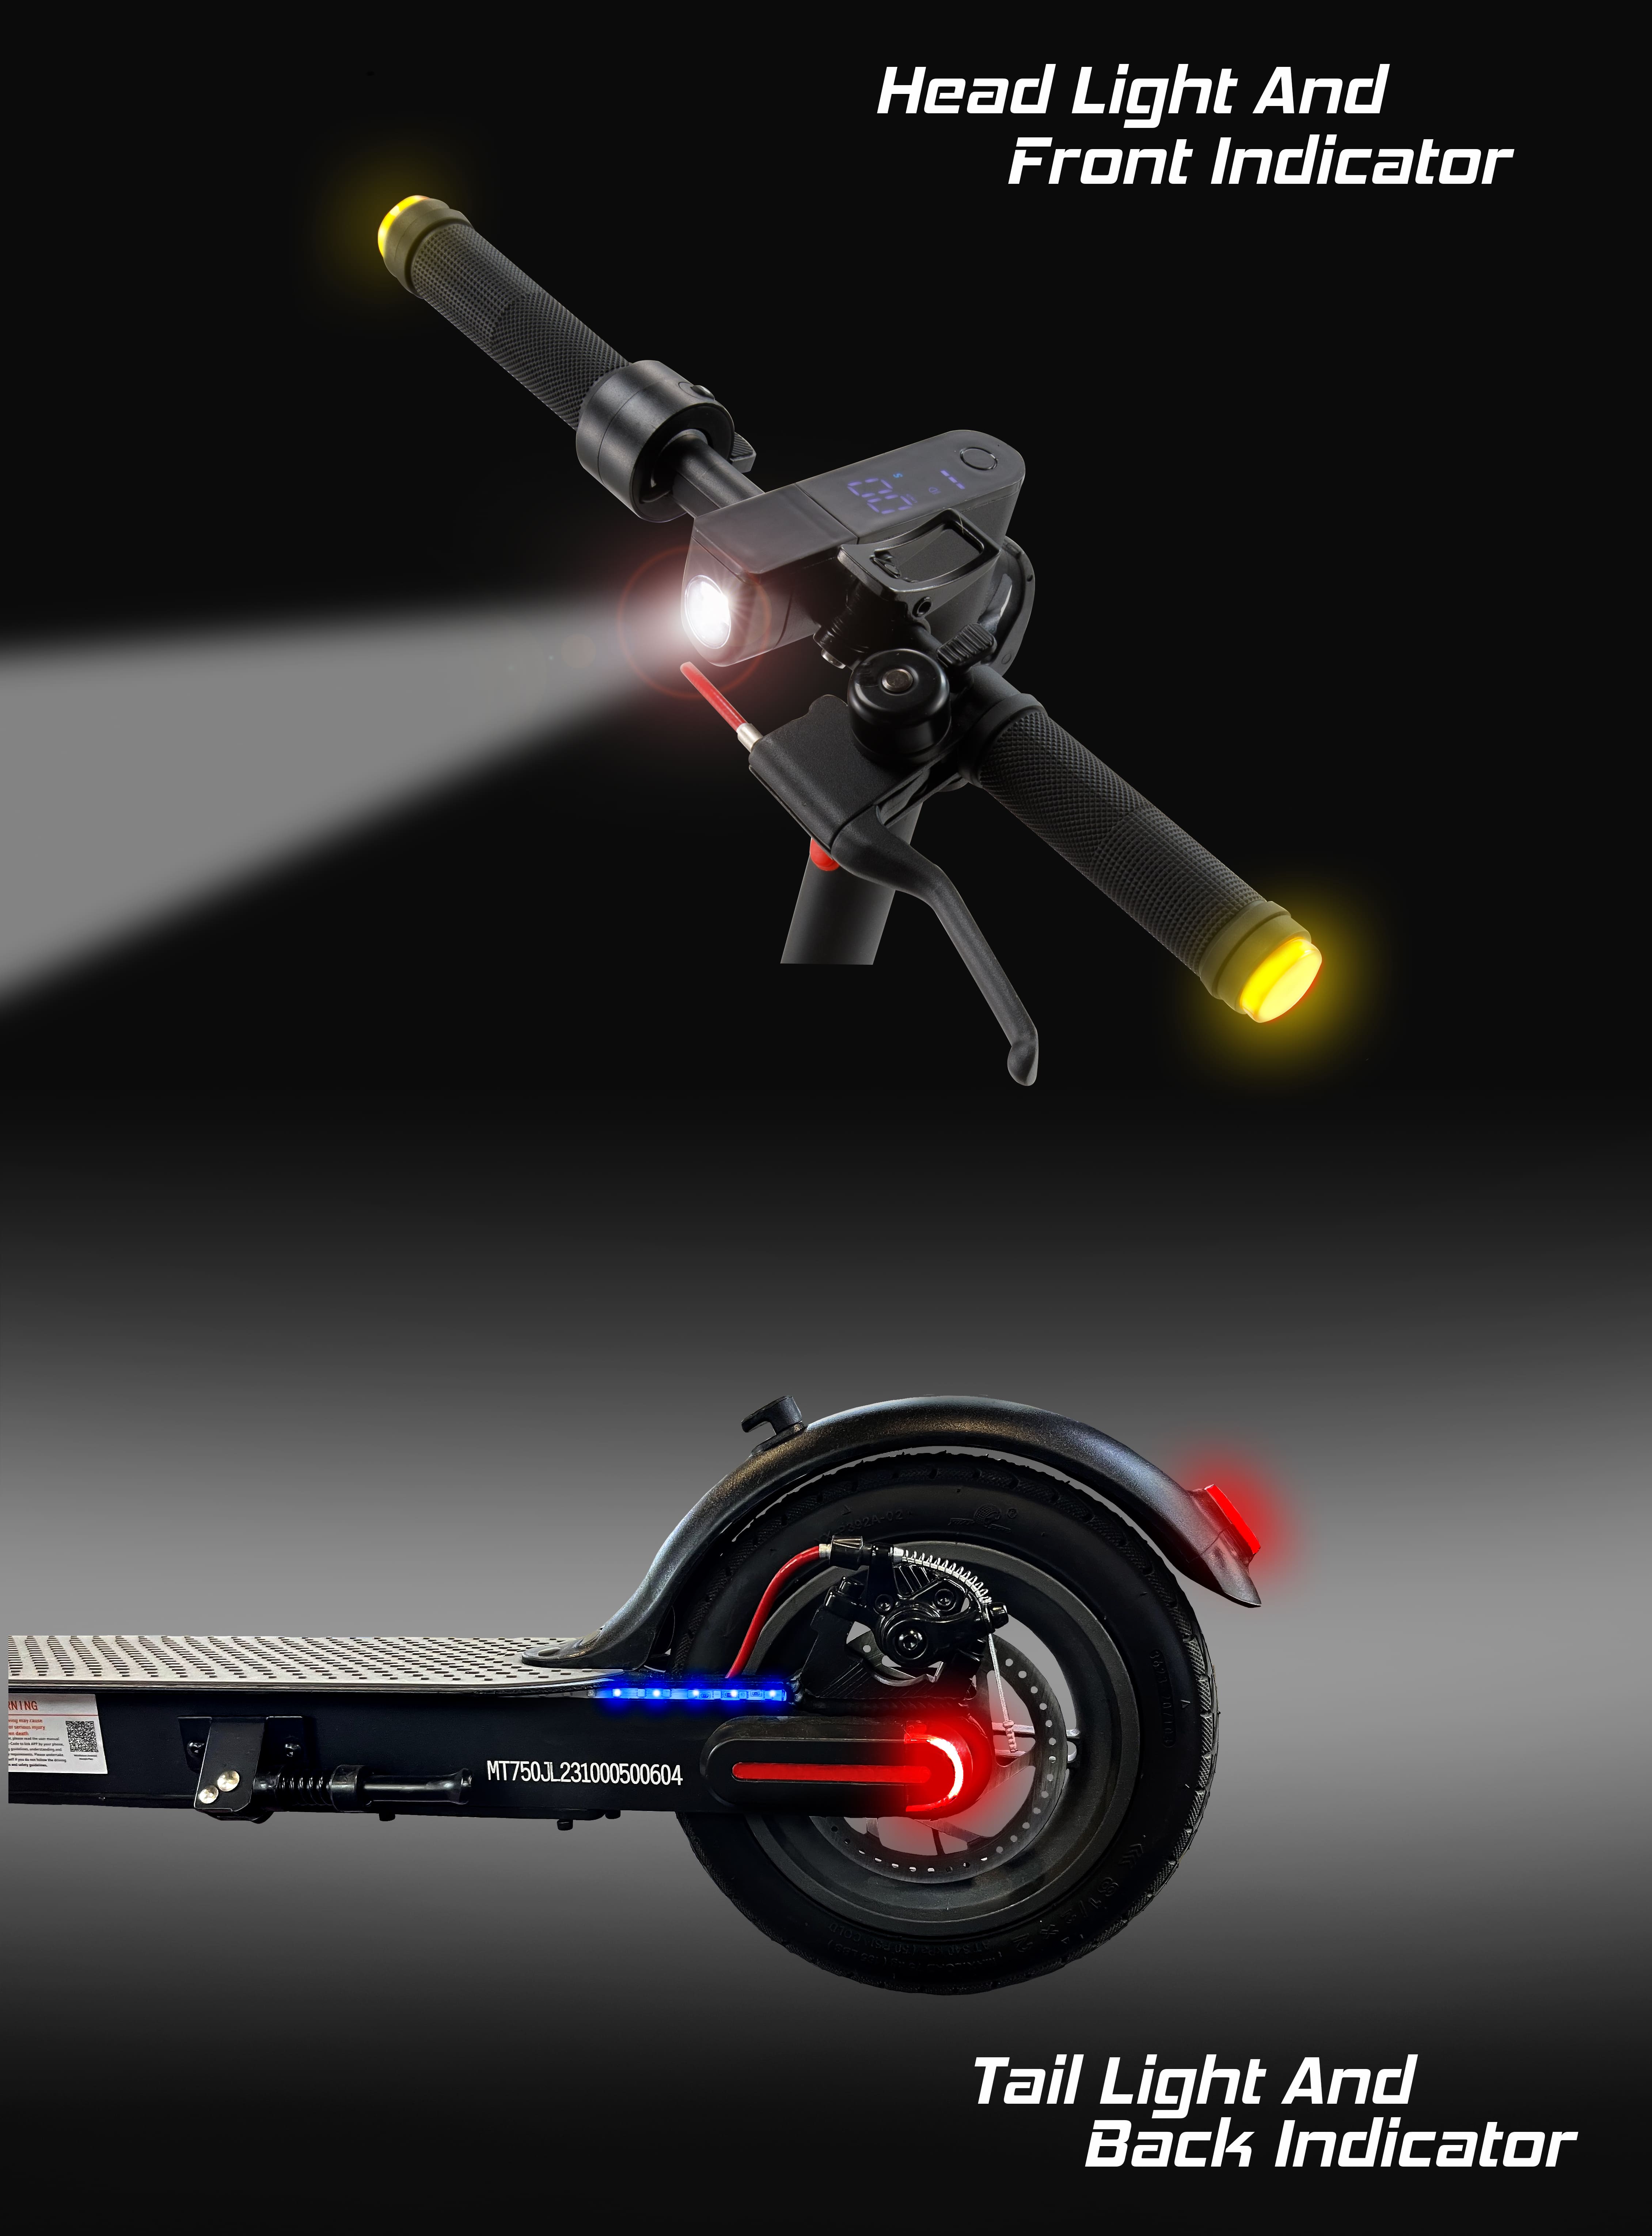 MT750 High Speed Electric Scooter With Flashing Turn Signals 350W Brushless Motor Three Speed Modes, App control 45km/h Speed